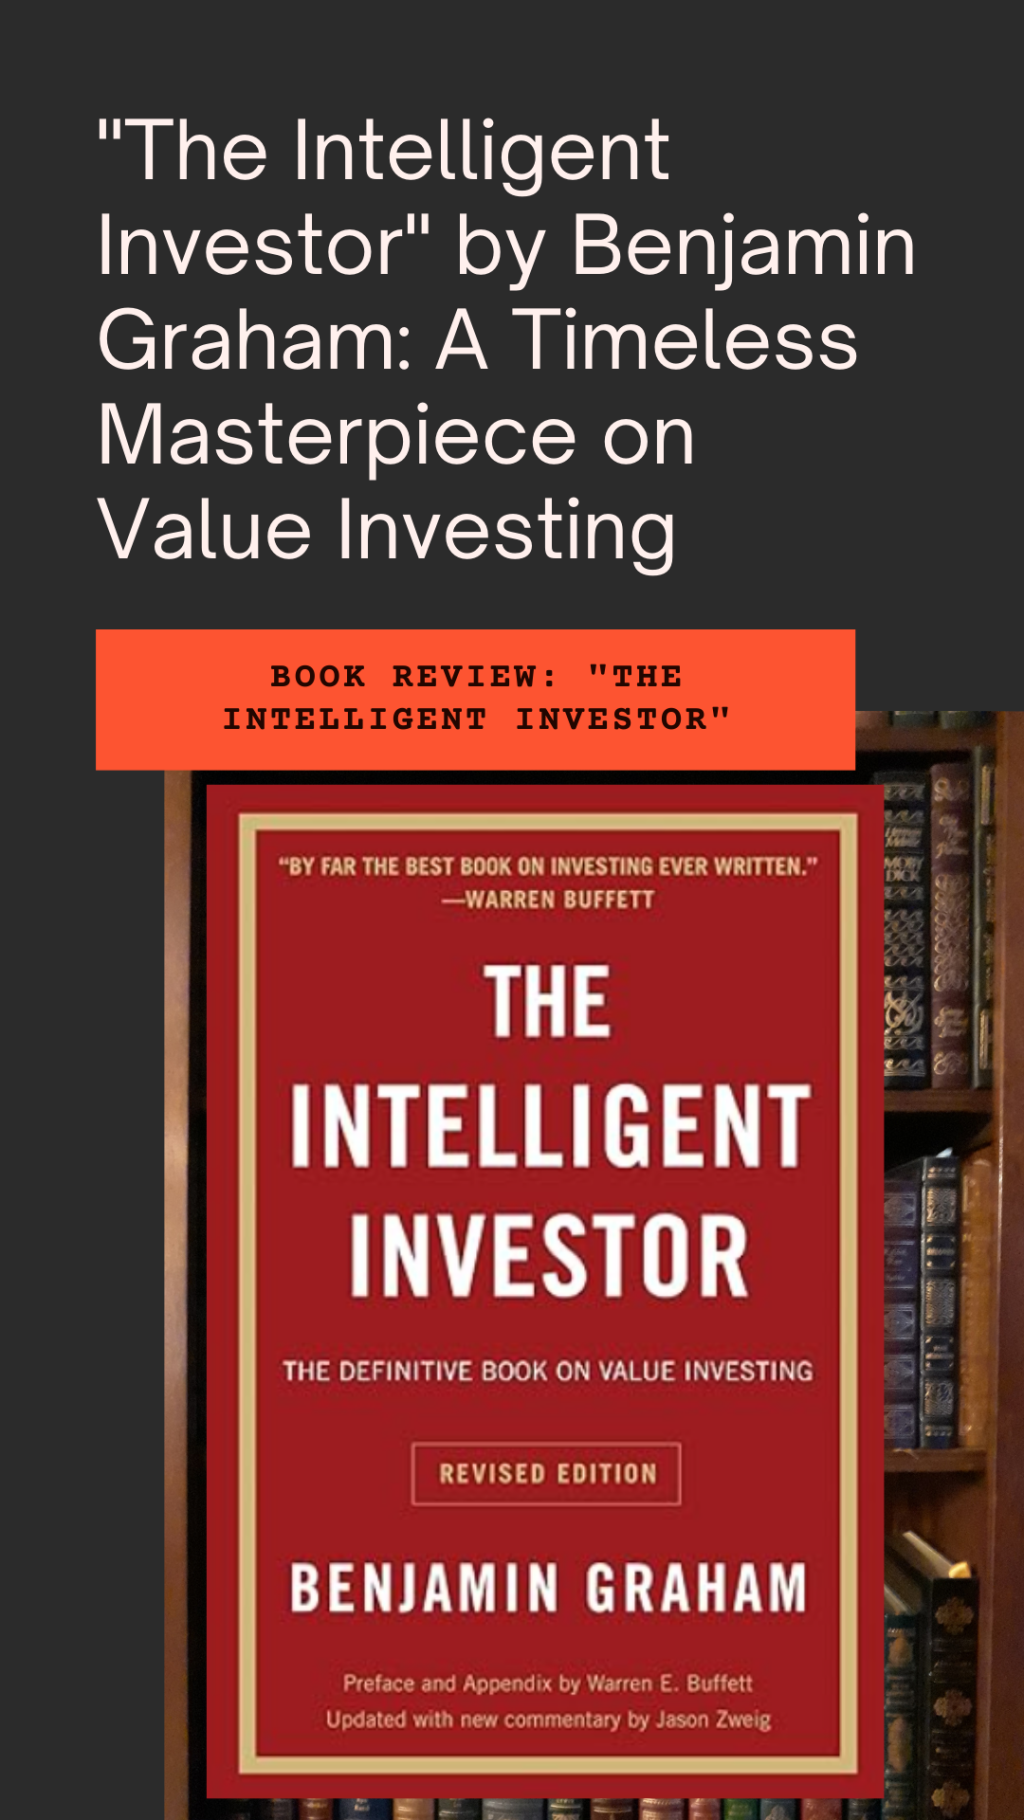 A Timeless Masterpiece in Value Investing: Reviewing “The Intelligent Investor” by Benjamin Graham